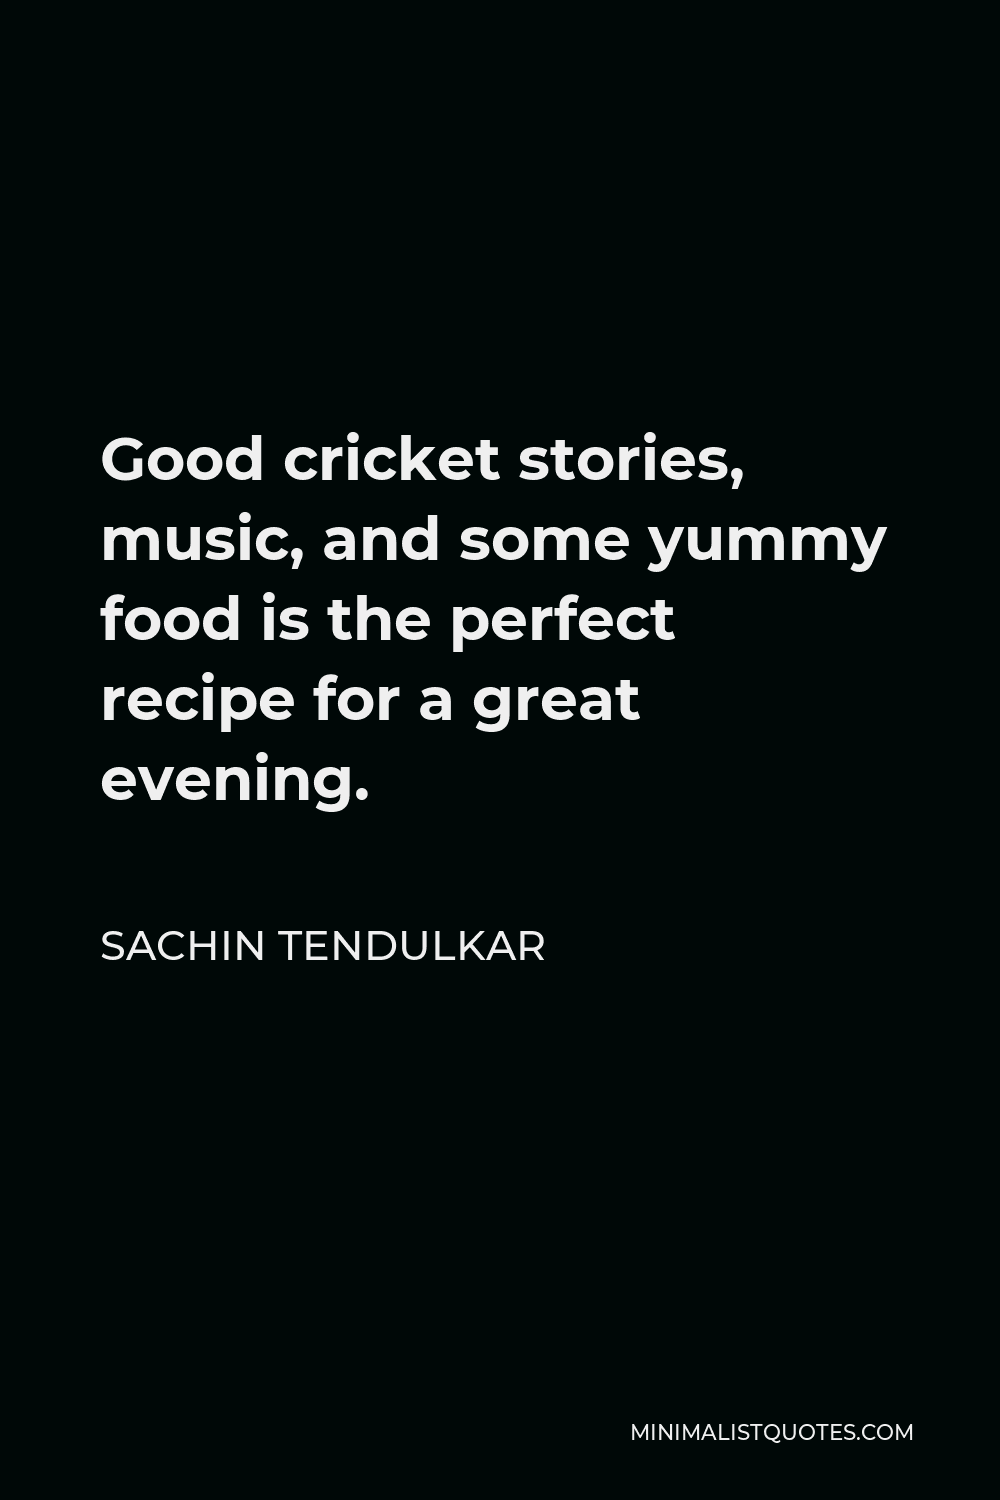 Sachin Tendulkar Quote - Good cricket stories, music, and some yummy food is the perfect recipe for a great evening.